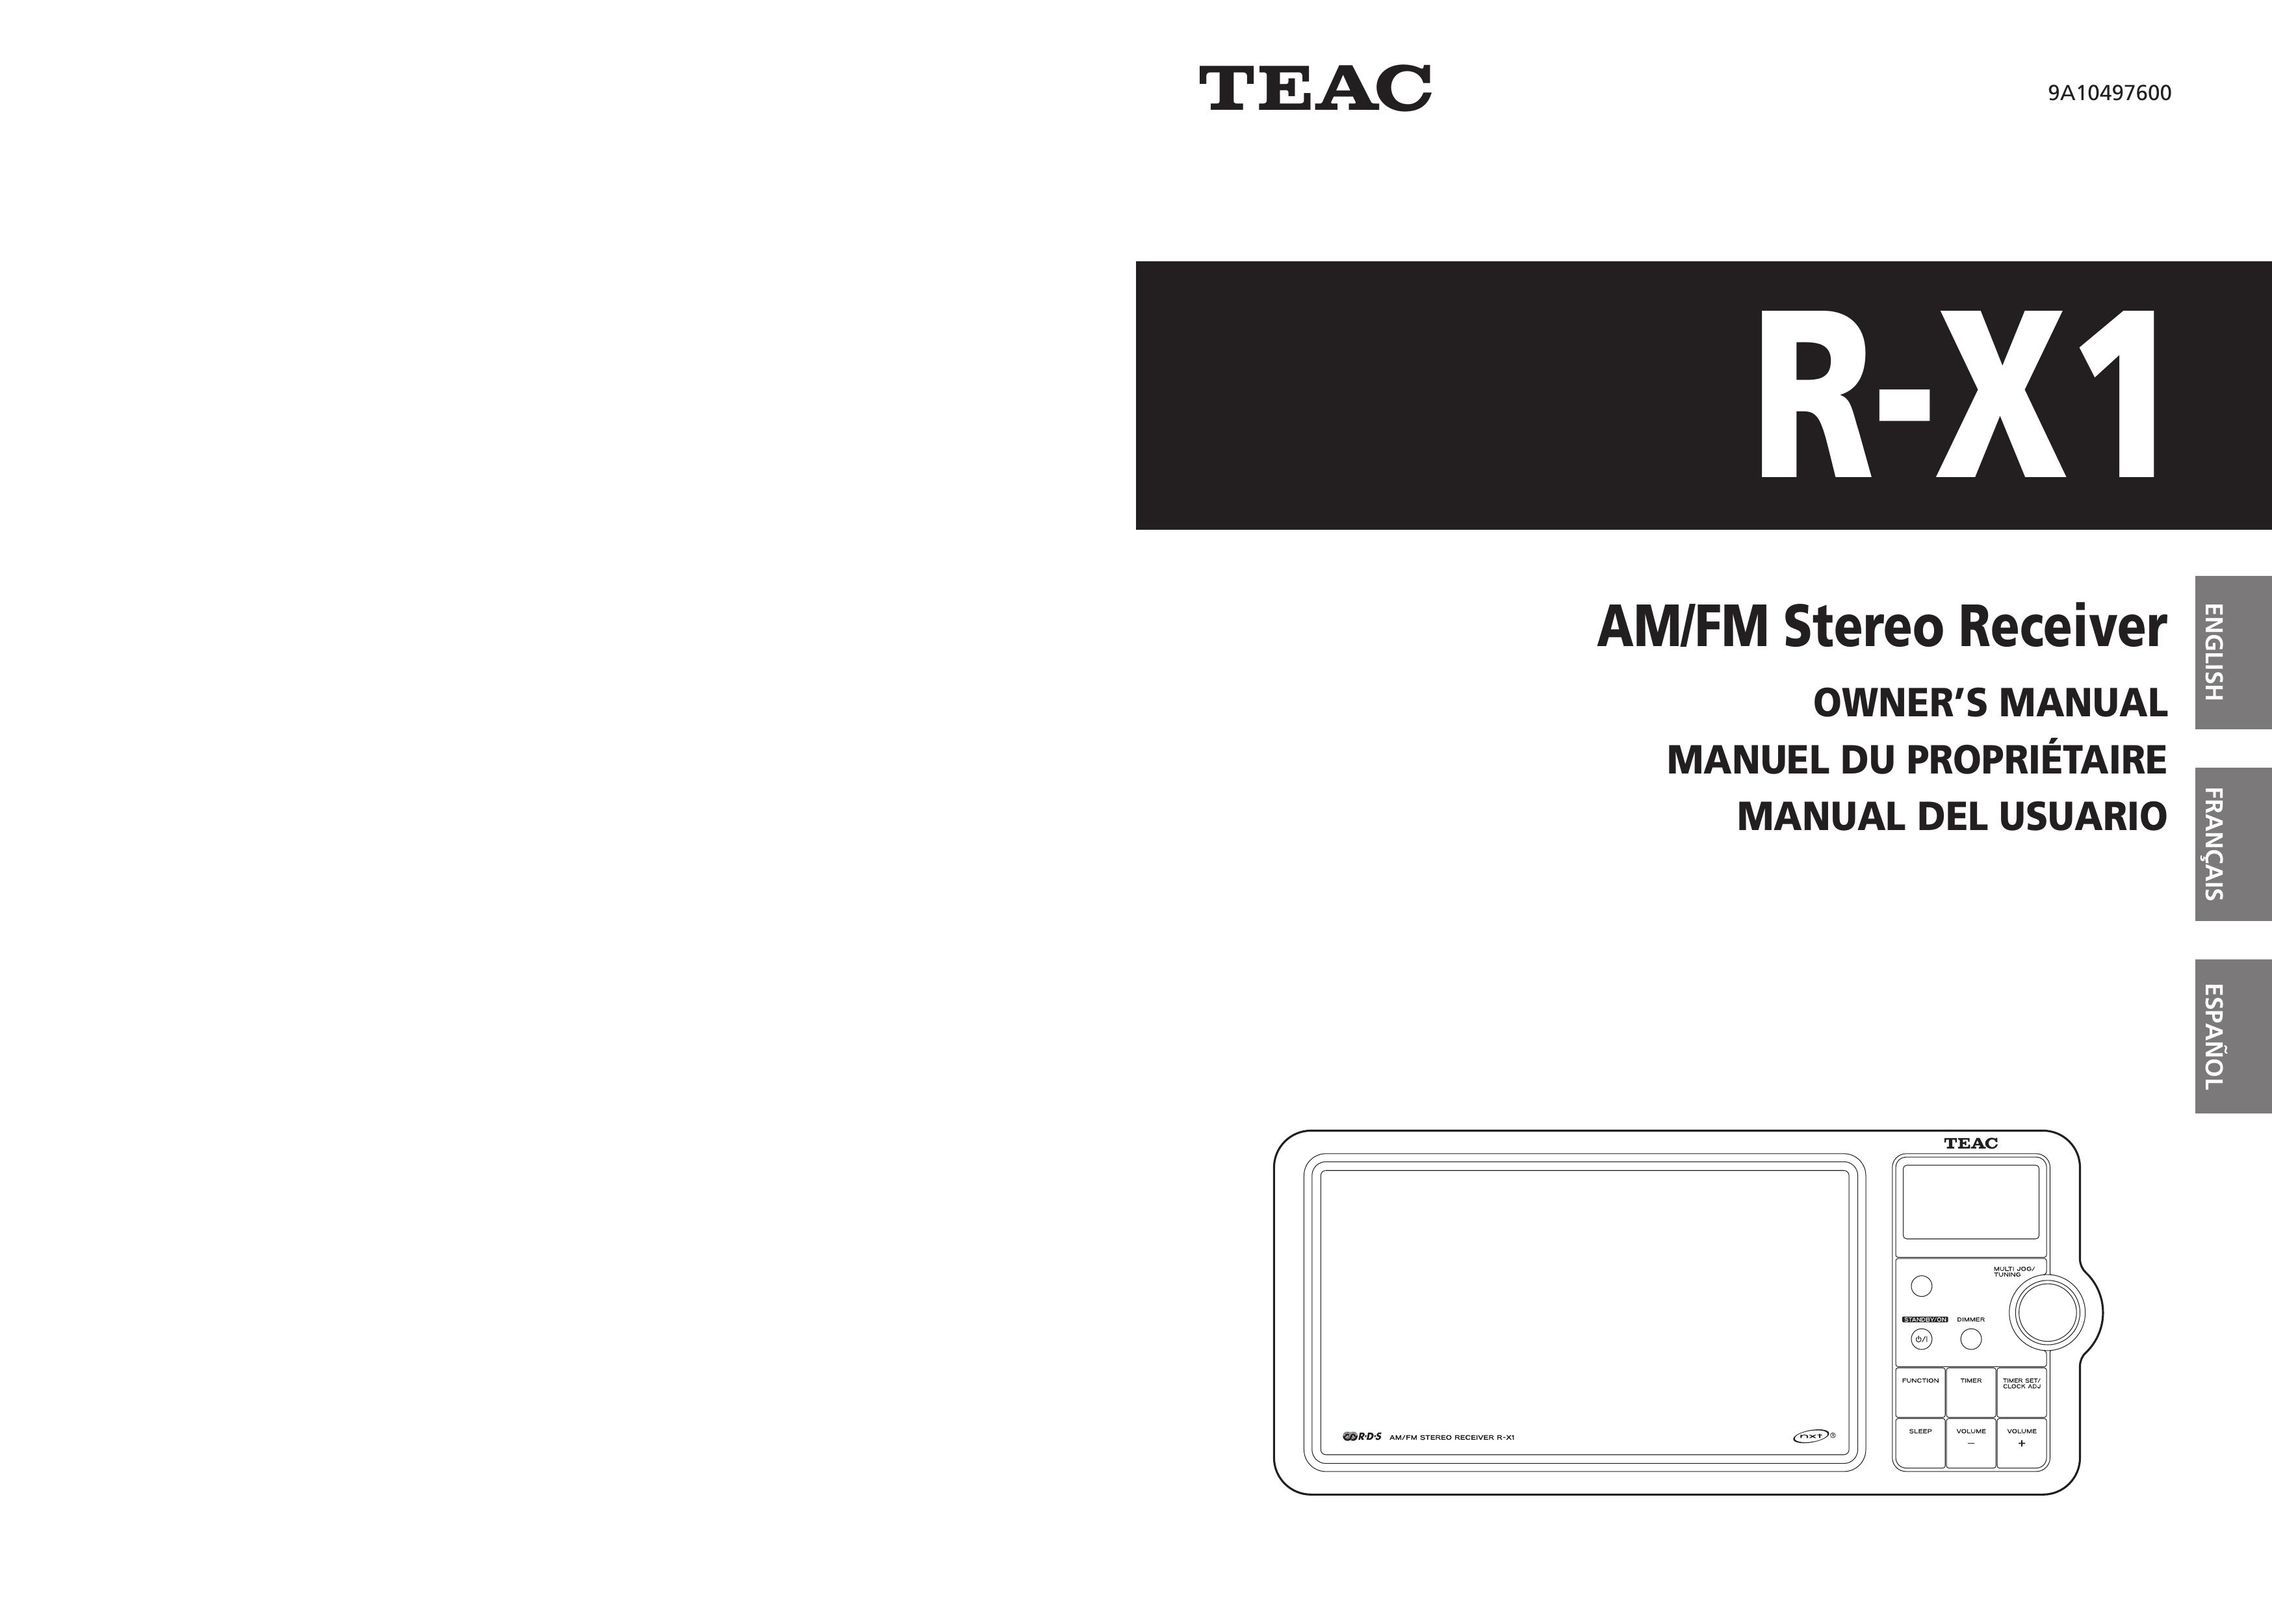 Teac R-X1 Stereo Receiver User Manual